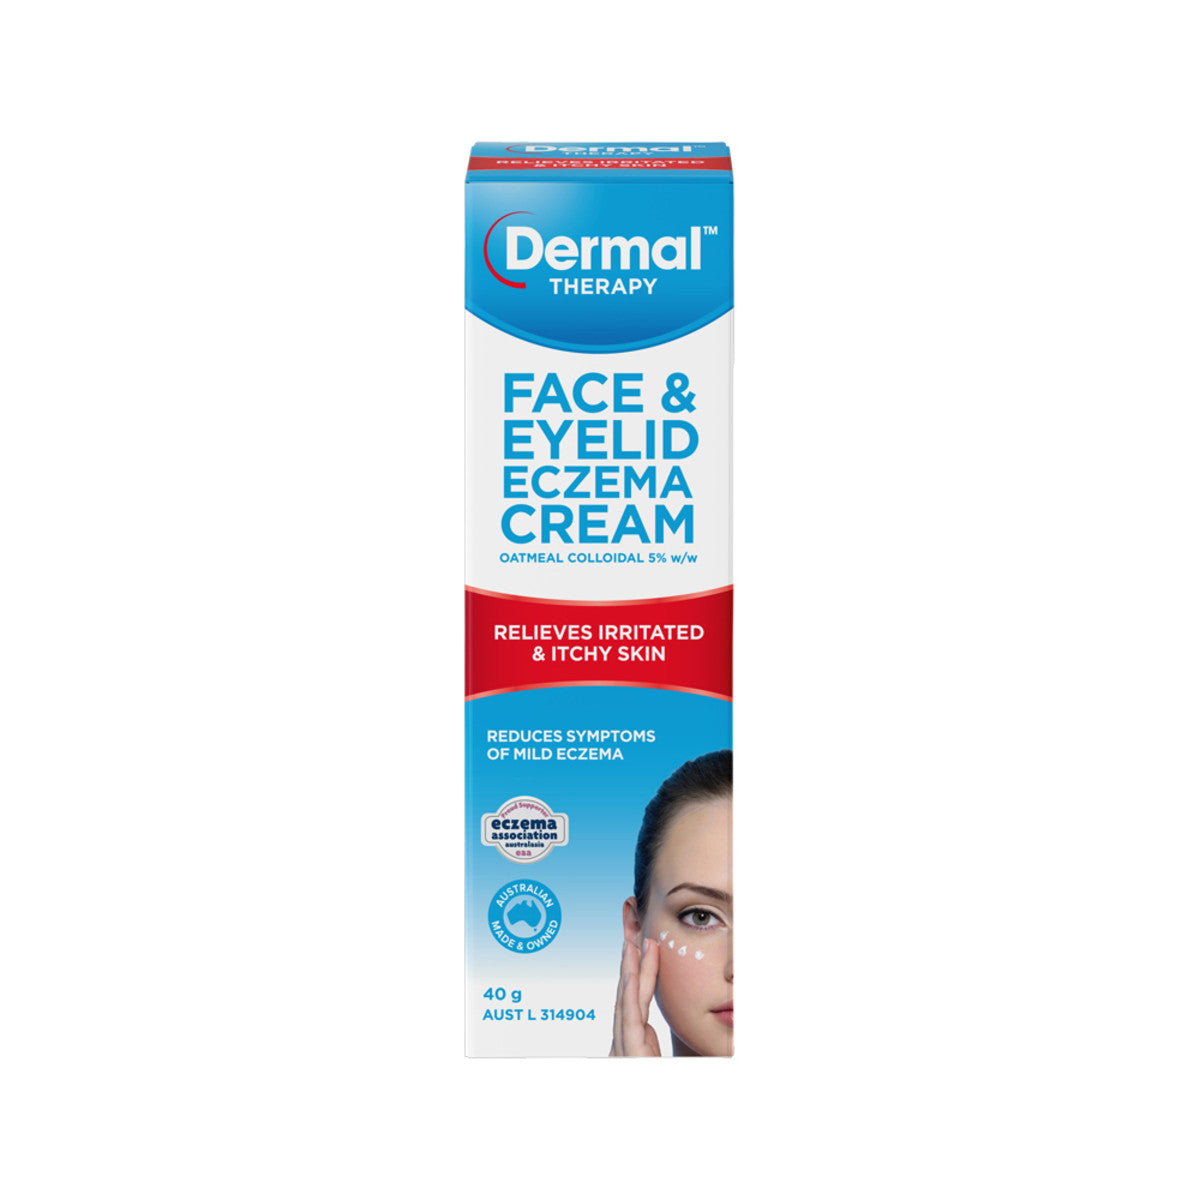 Dermal Therapy - Face and Eyelid Eczema Cream